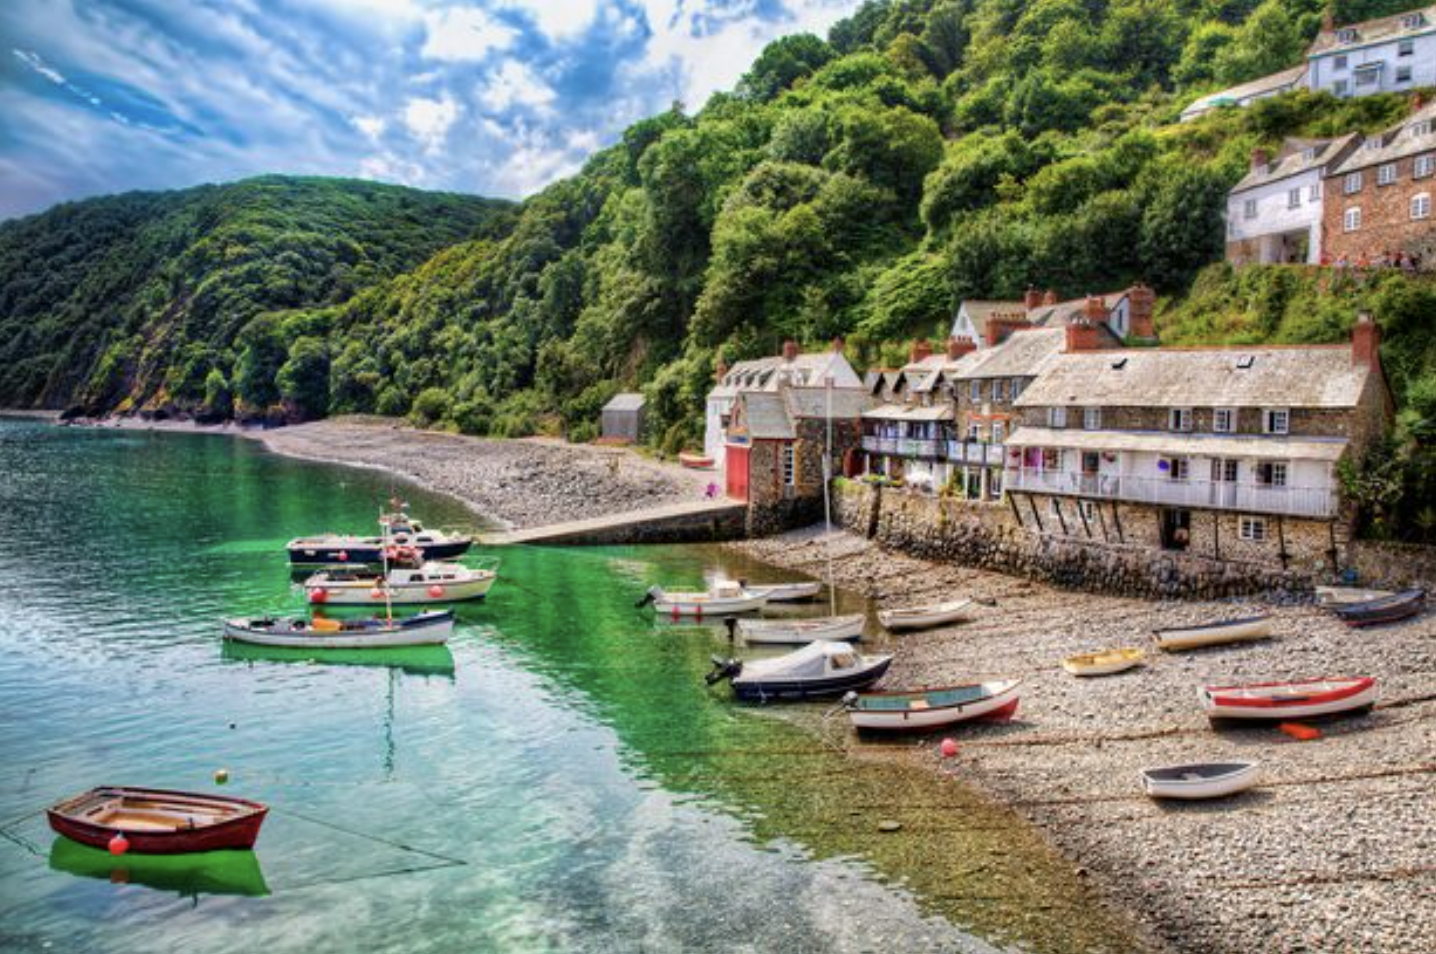 Clovelly named one of ‘7 magical Devon villages and towns so beautiful they belong in a fairytale’ – MyLondon